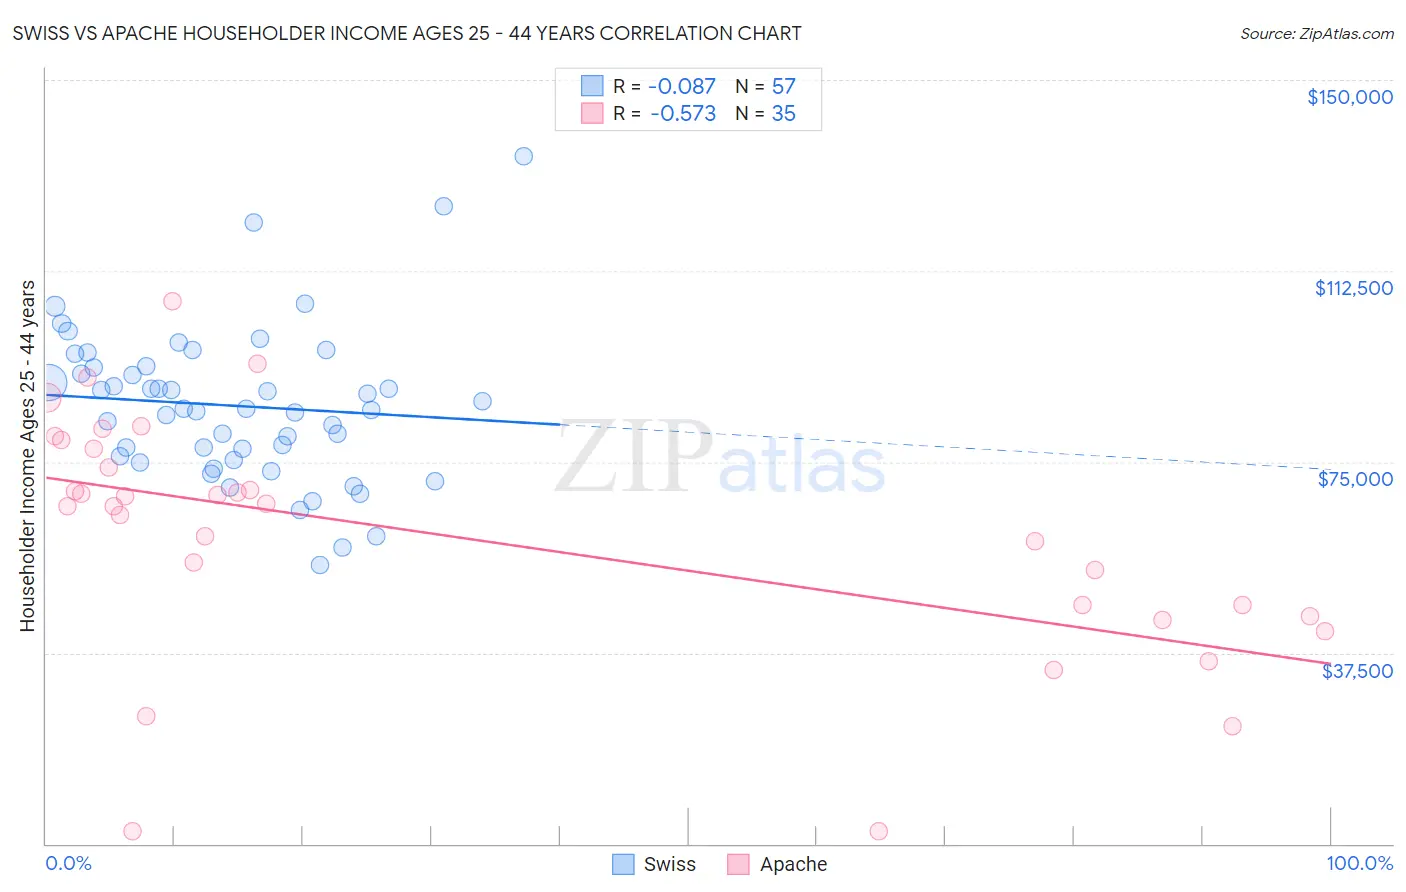 Swiss vs Apache Householder Income Ages 25 - 44 years